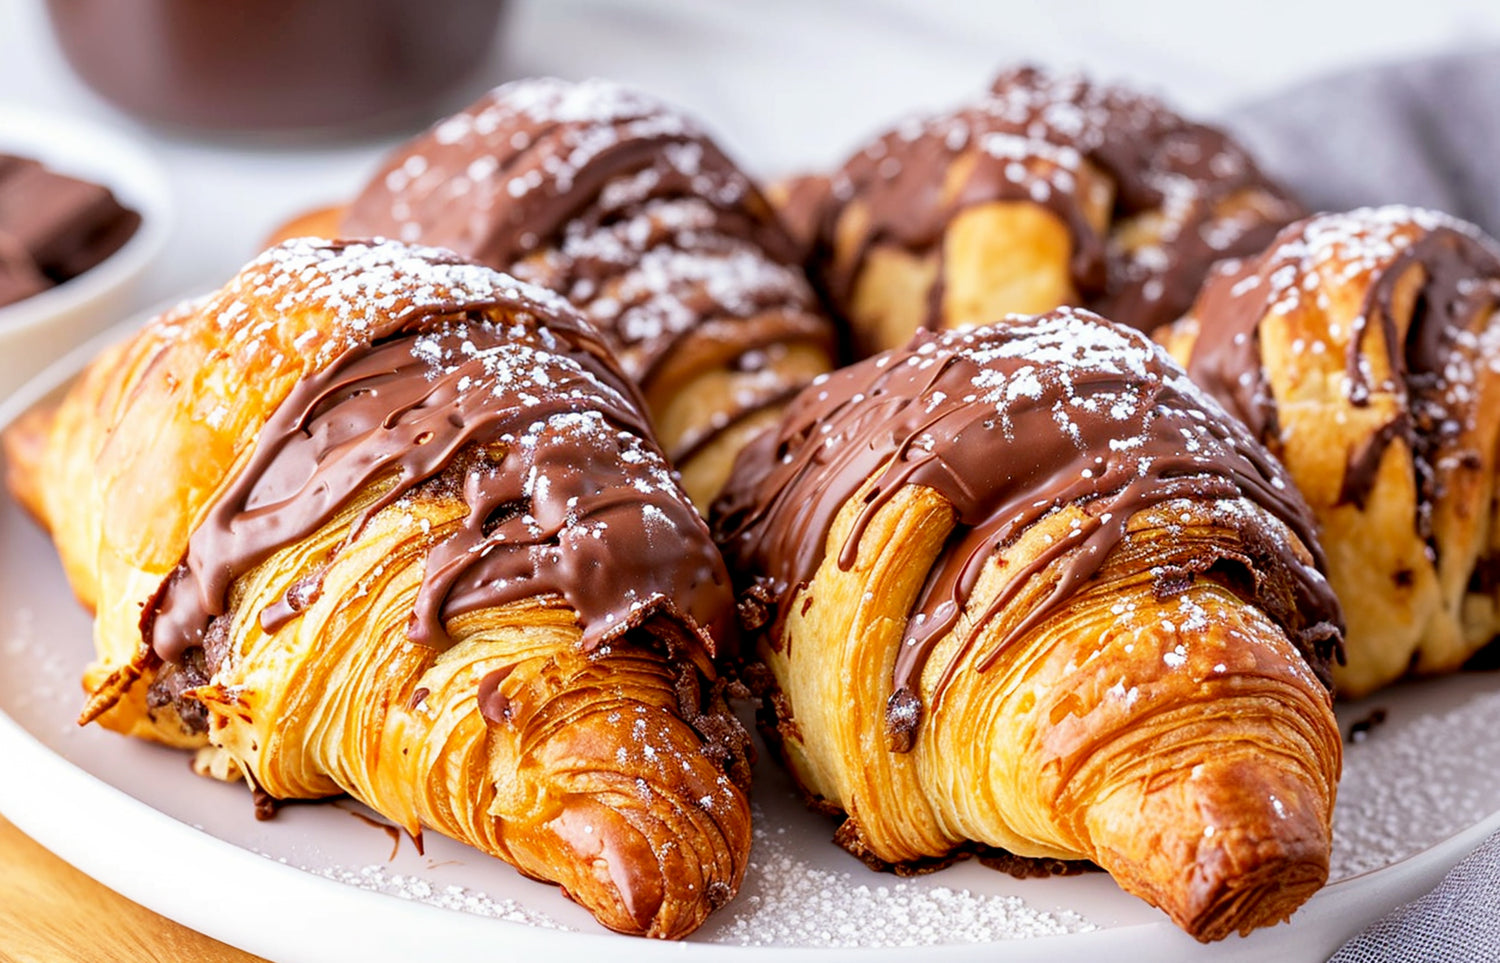 Gourmet chocolate-drizzled croissants on a white plate by Ruokala